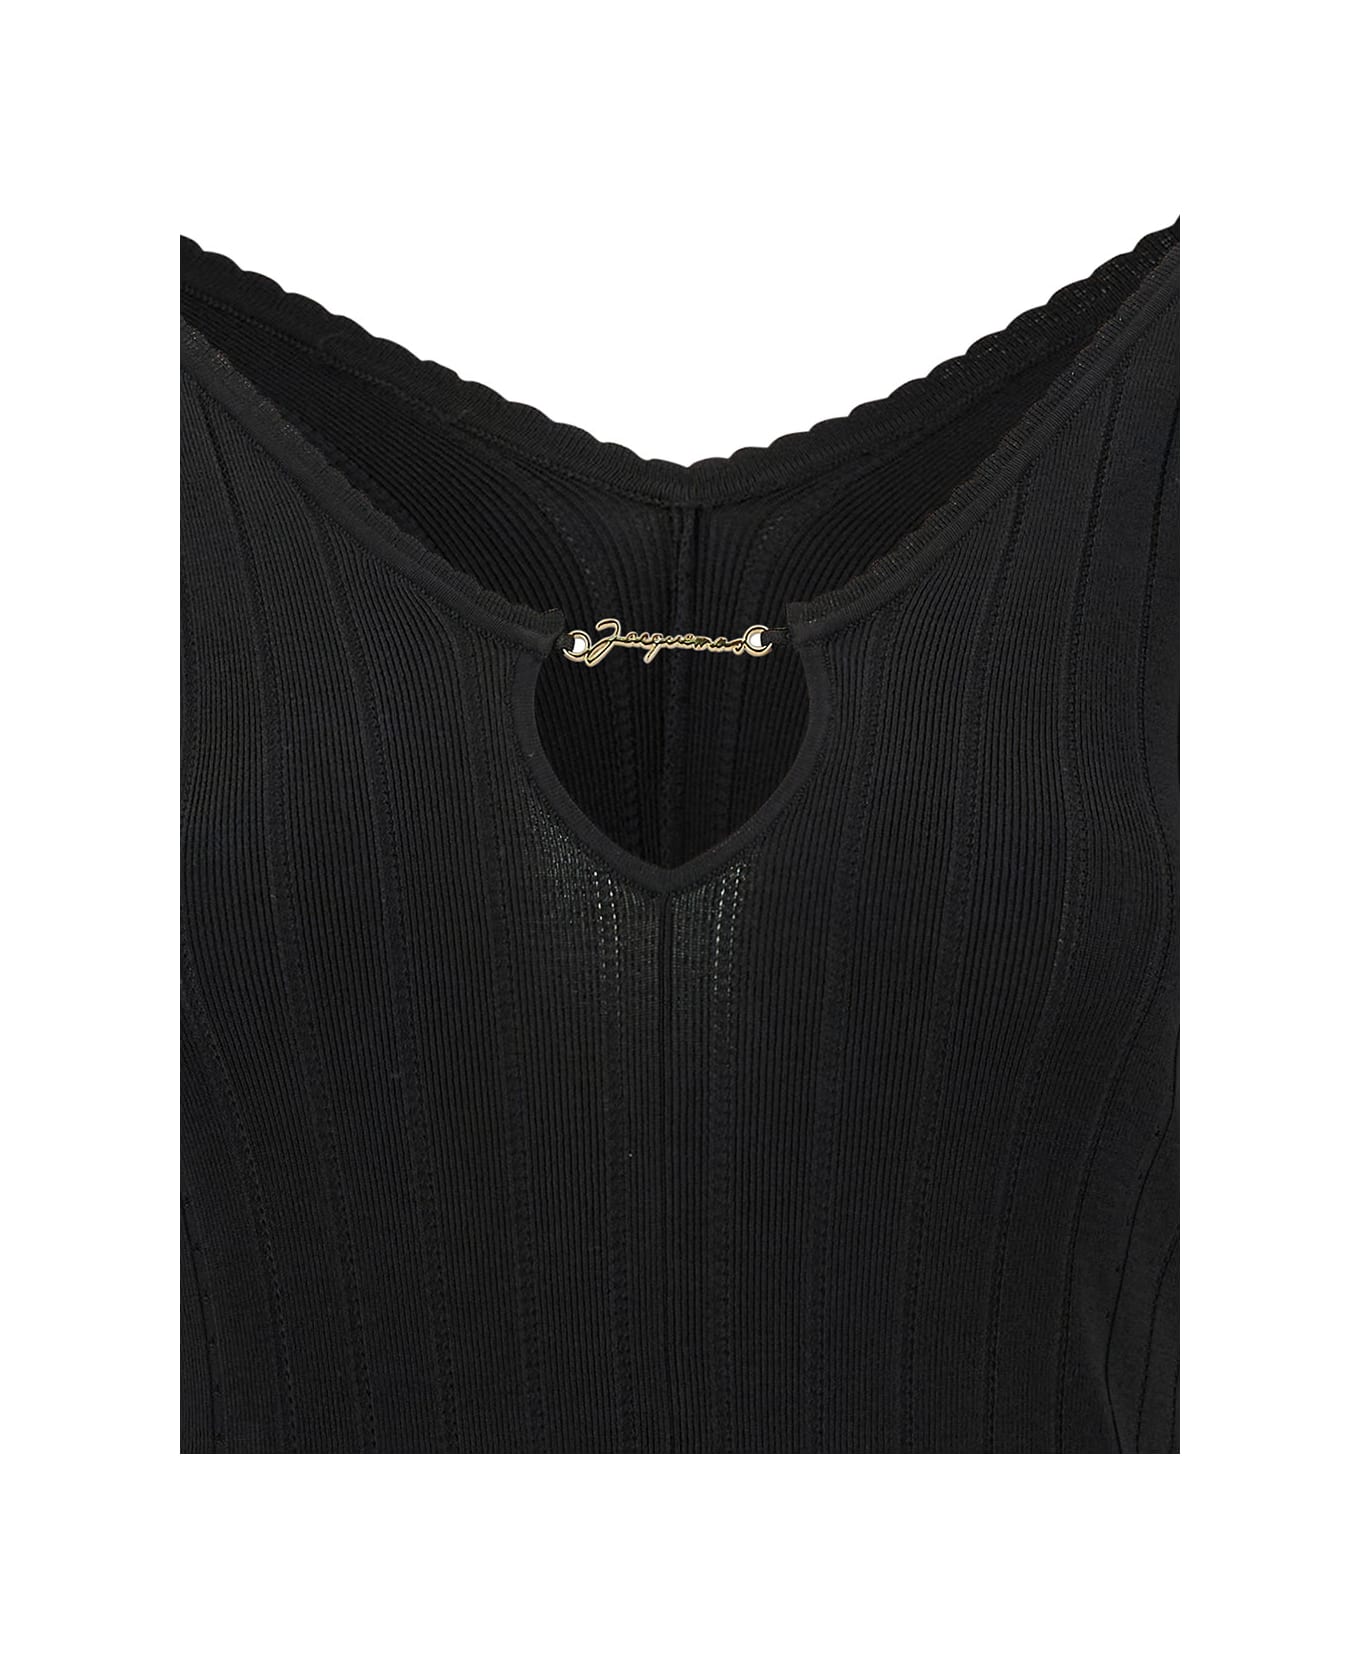 Jacquemus Black Long Sleeve Top With Logo Detail And Cut-out In Viscose Blend Woman - Black